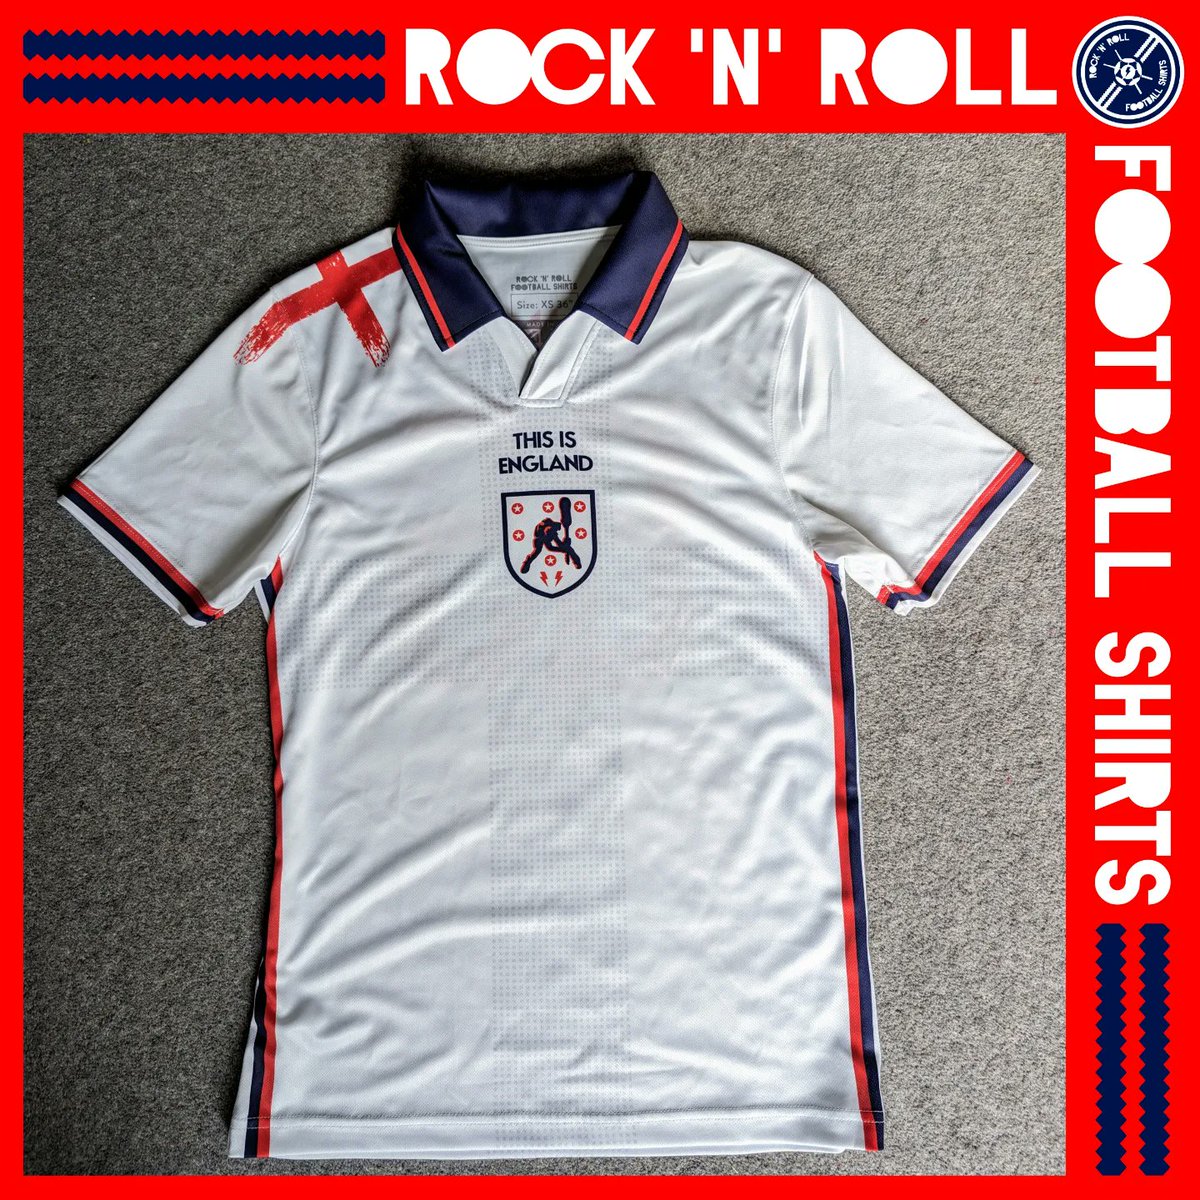 If we designed the England shirt it would look a lot like like this.

nxt lvl THIS IS ENGLAND football shirt coming soon 

#thisisengland #theclash #joestrummer #cutthecrap #londoncalling #englandfootballteam #englishfootball #footballshirt #bandshirt